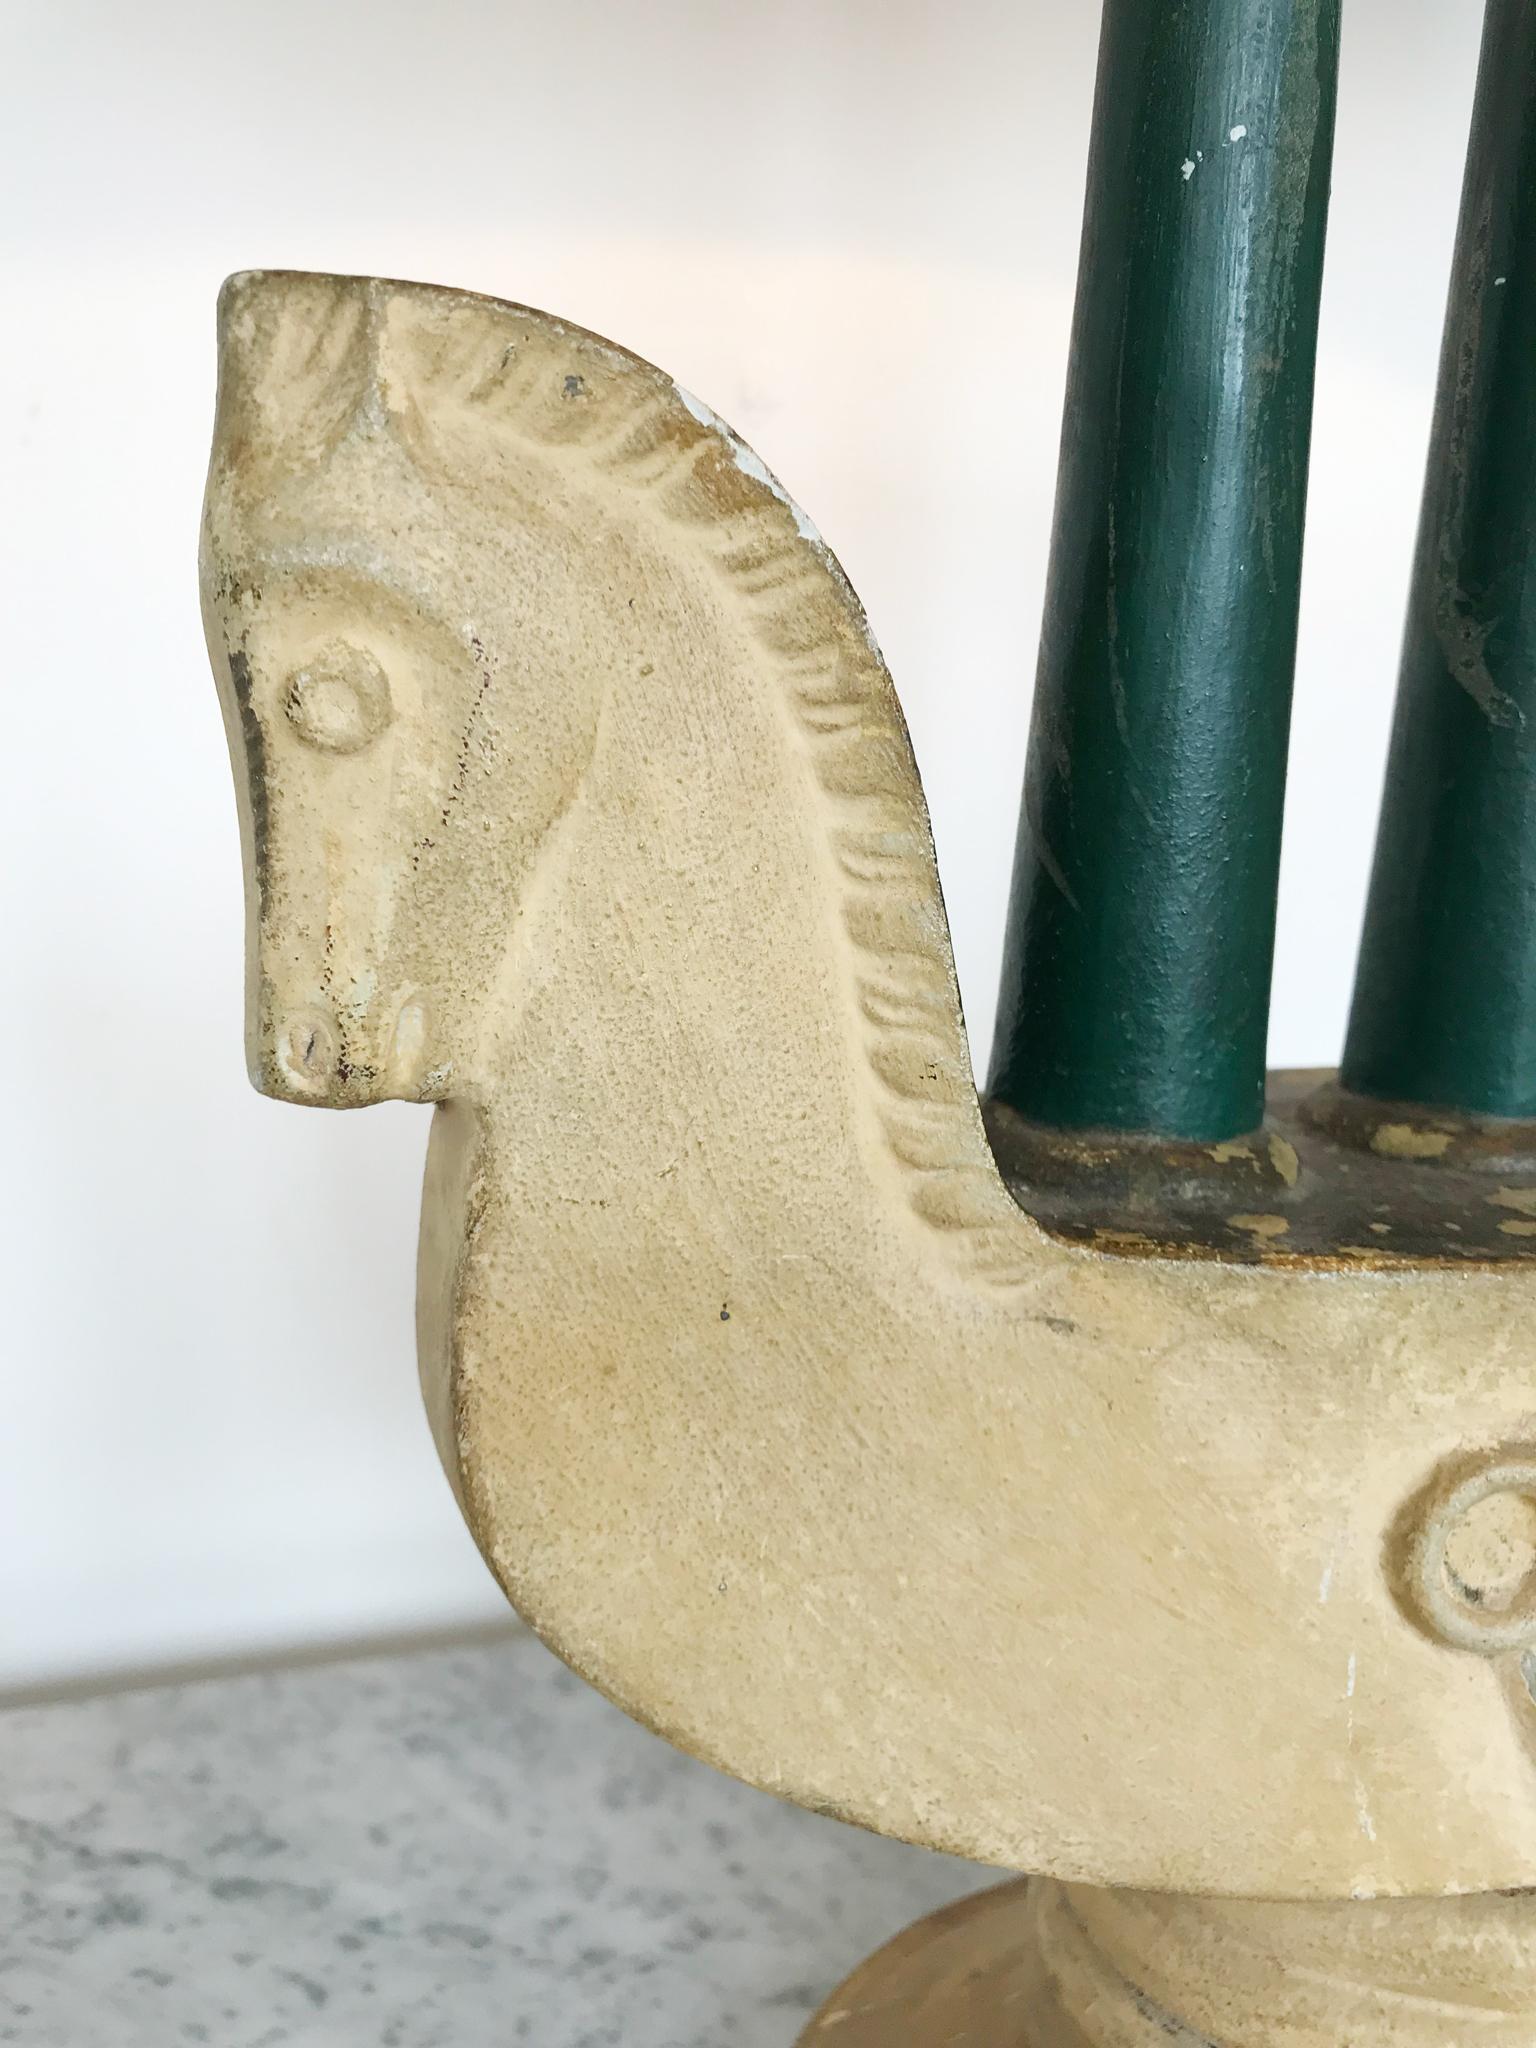 A Venetian painted plaster lamp in the form of a horse/vessel. Triple column in a painted dark green finish. Ovoid painted lamp shade in painted dark green, circa 1940s.

Height: 51cm (71cm including shade)
Width: 28cm (39cm with shade)